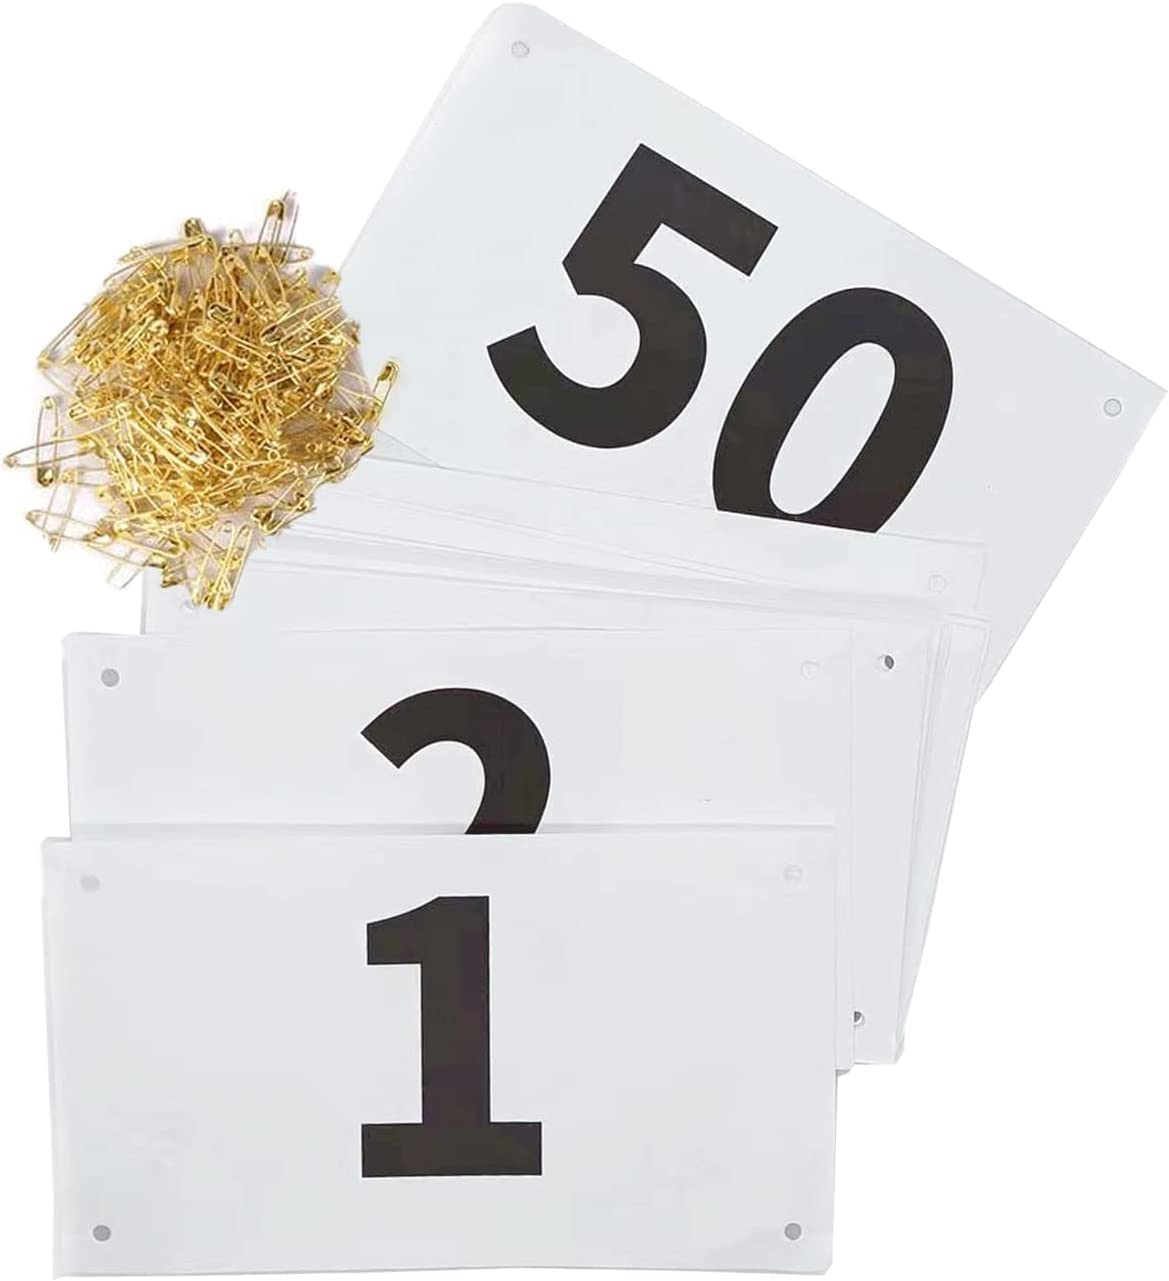 Running Bib Large Numbers with Safety Pins for Marathon Races and Events -  Tyvek Tearproof and Waterproof 6 X 7.5 Inches